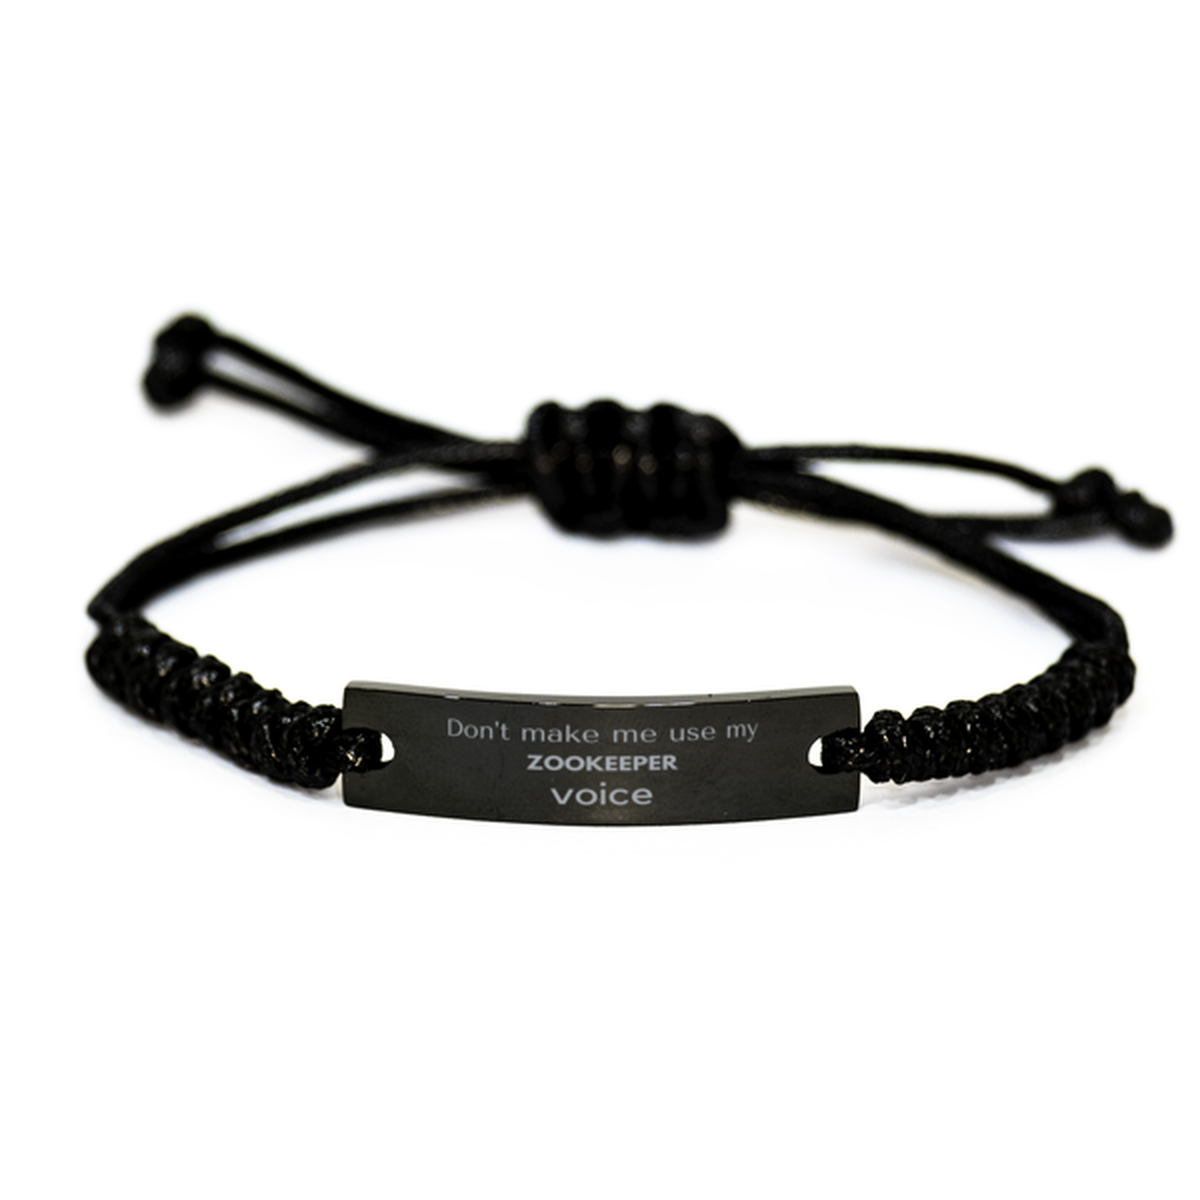 Don't make me use my Zookeeper voice, Sarcasm Zookeeper Gifts, Christmas Zookeeper Black Rope Bracelet Birthday Unique Gifts For Zookeeper Coworkers, Men, Women, Colleague, Friends